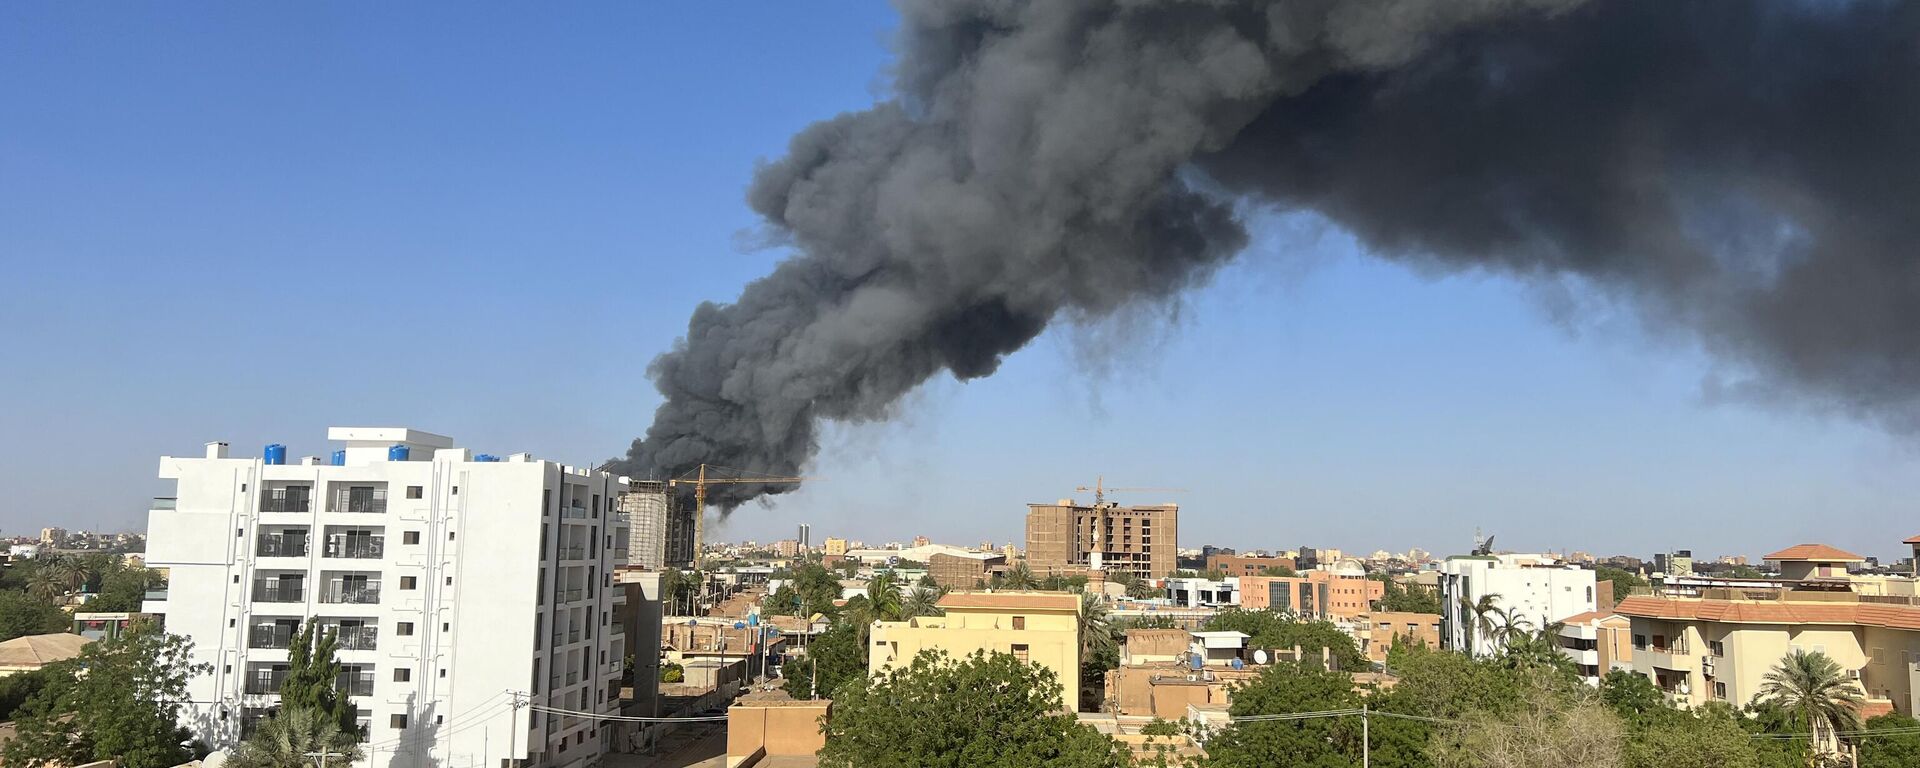 A column of smoke rises behind buildings near the airport area in Khartoum on April 19, 2023, amid fighting between the army and paramilitaries following the collapse of a 24-hour truce.  - Sputnik International, 1920, 02.05.2023